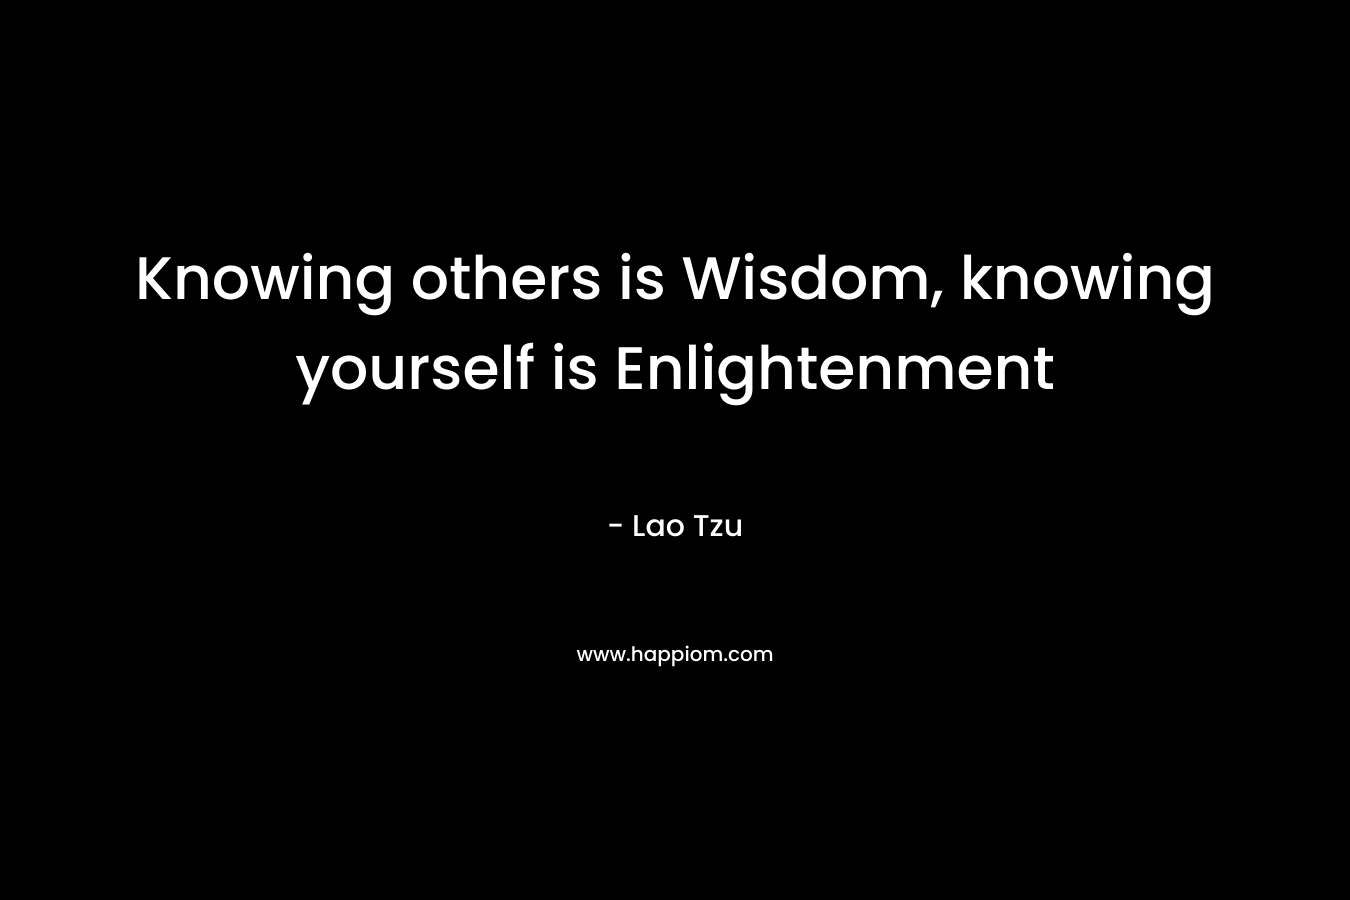 Knowing others is Wisdom, knowing yourself is Enlightenment